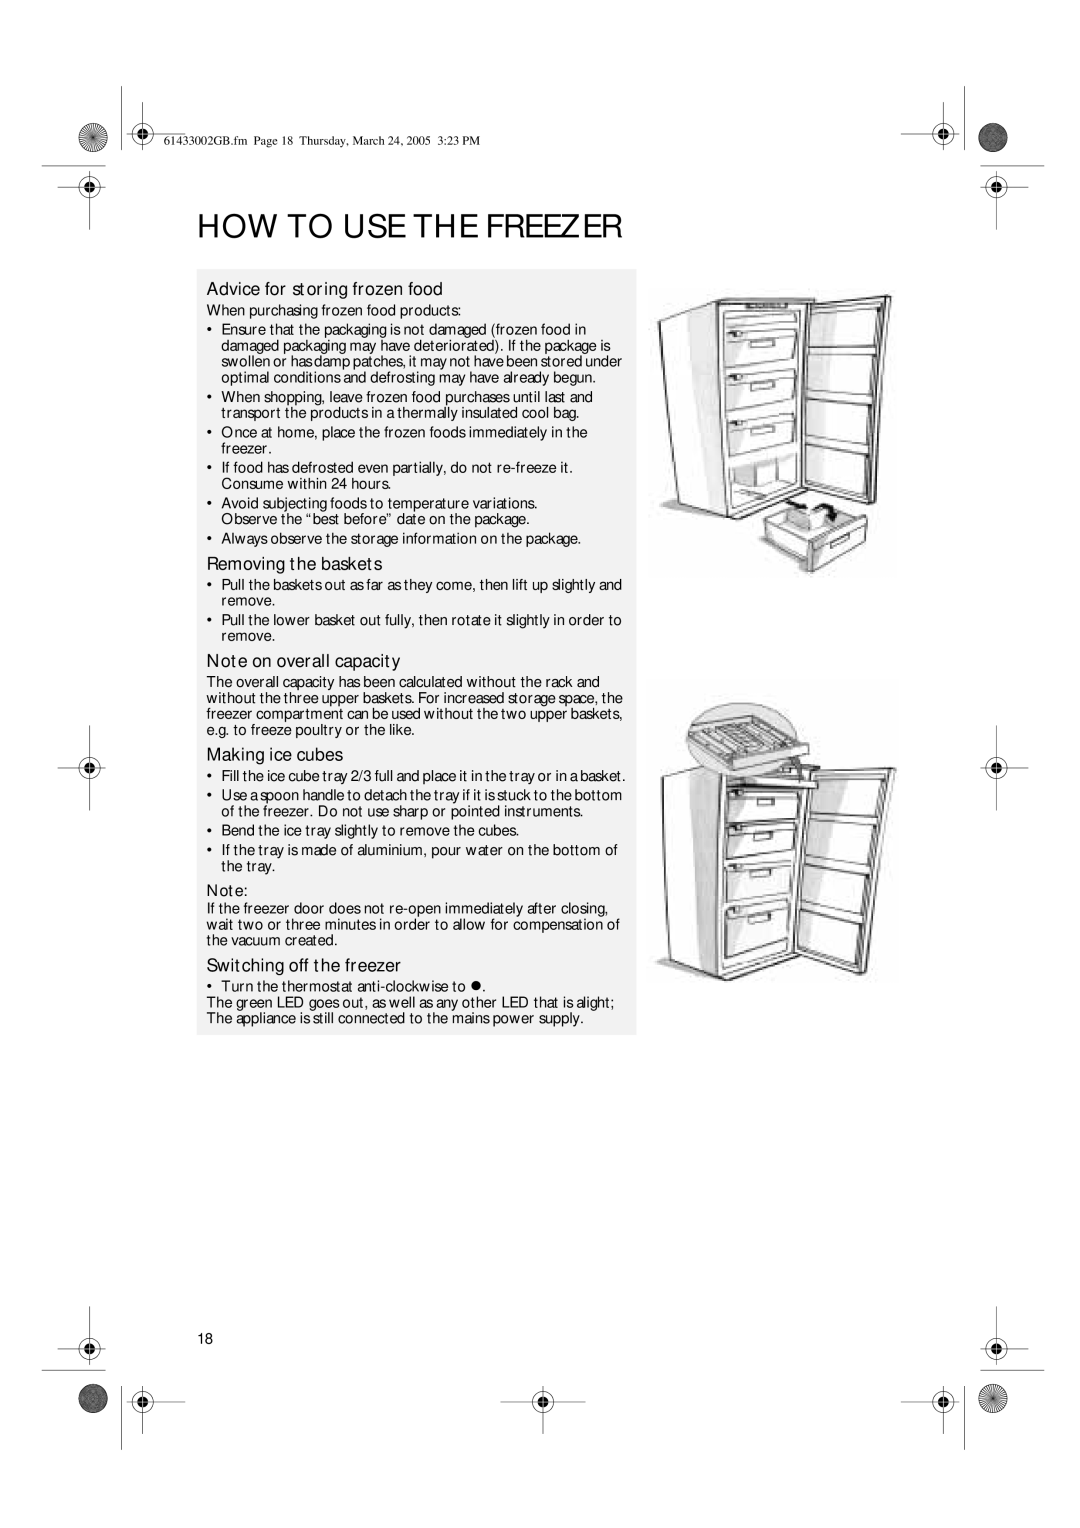 CDA FW480 manual Advice for storing frozen food, Removing the baskets, Note on overall capacity, Making ice cubes 